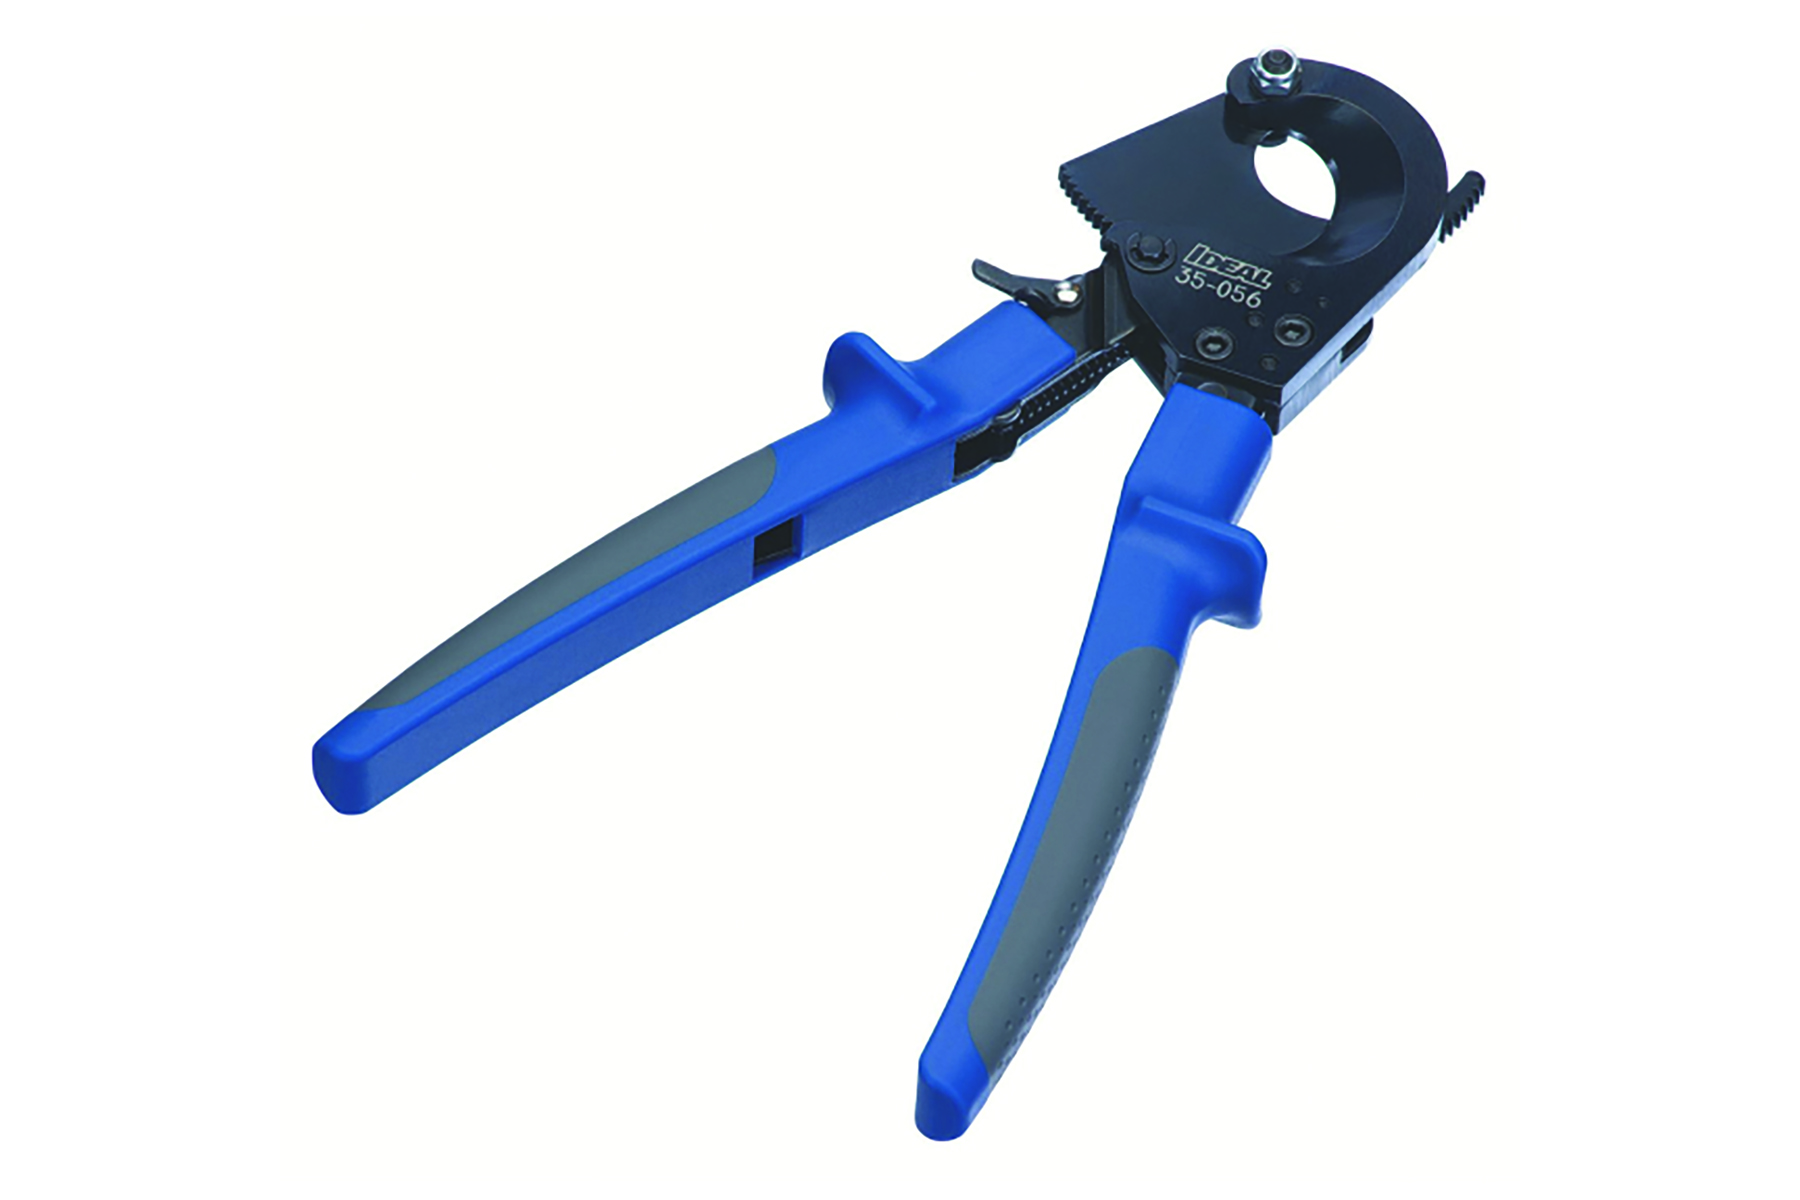 Blue and gray cable cutter. Image by Ideal Industries.